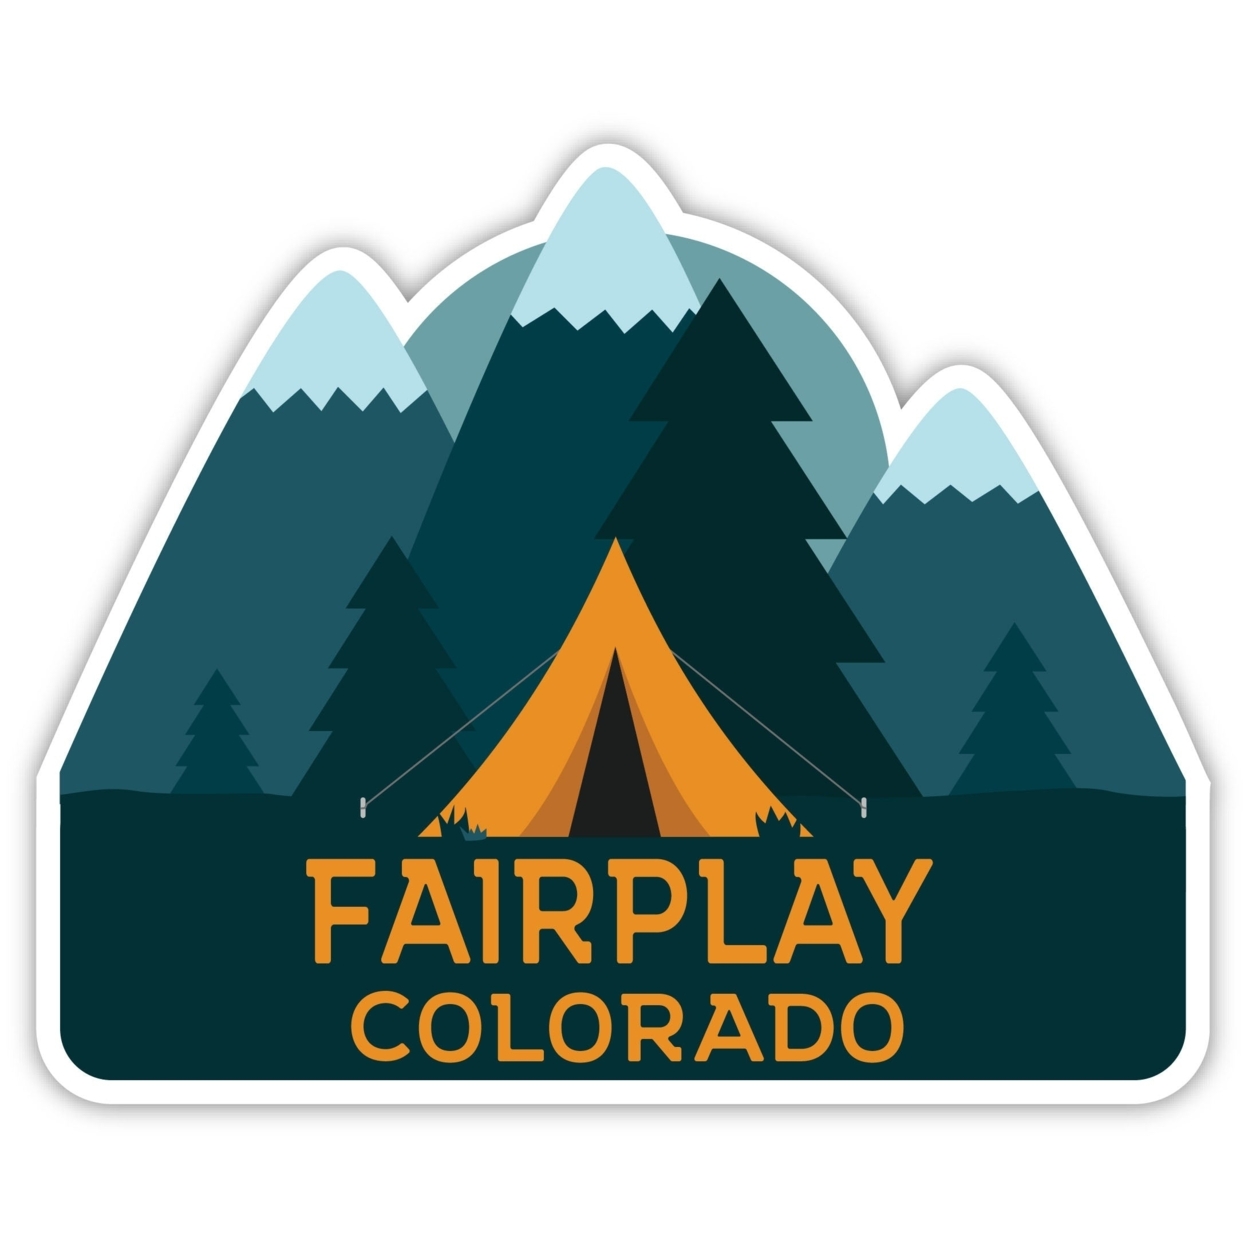 Fairplay Colorado Souvenir Decorative Stickers (Choose Theme And Size) - 4-Pack, 4-Inch, Adventures Awaits